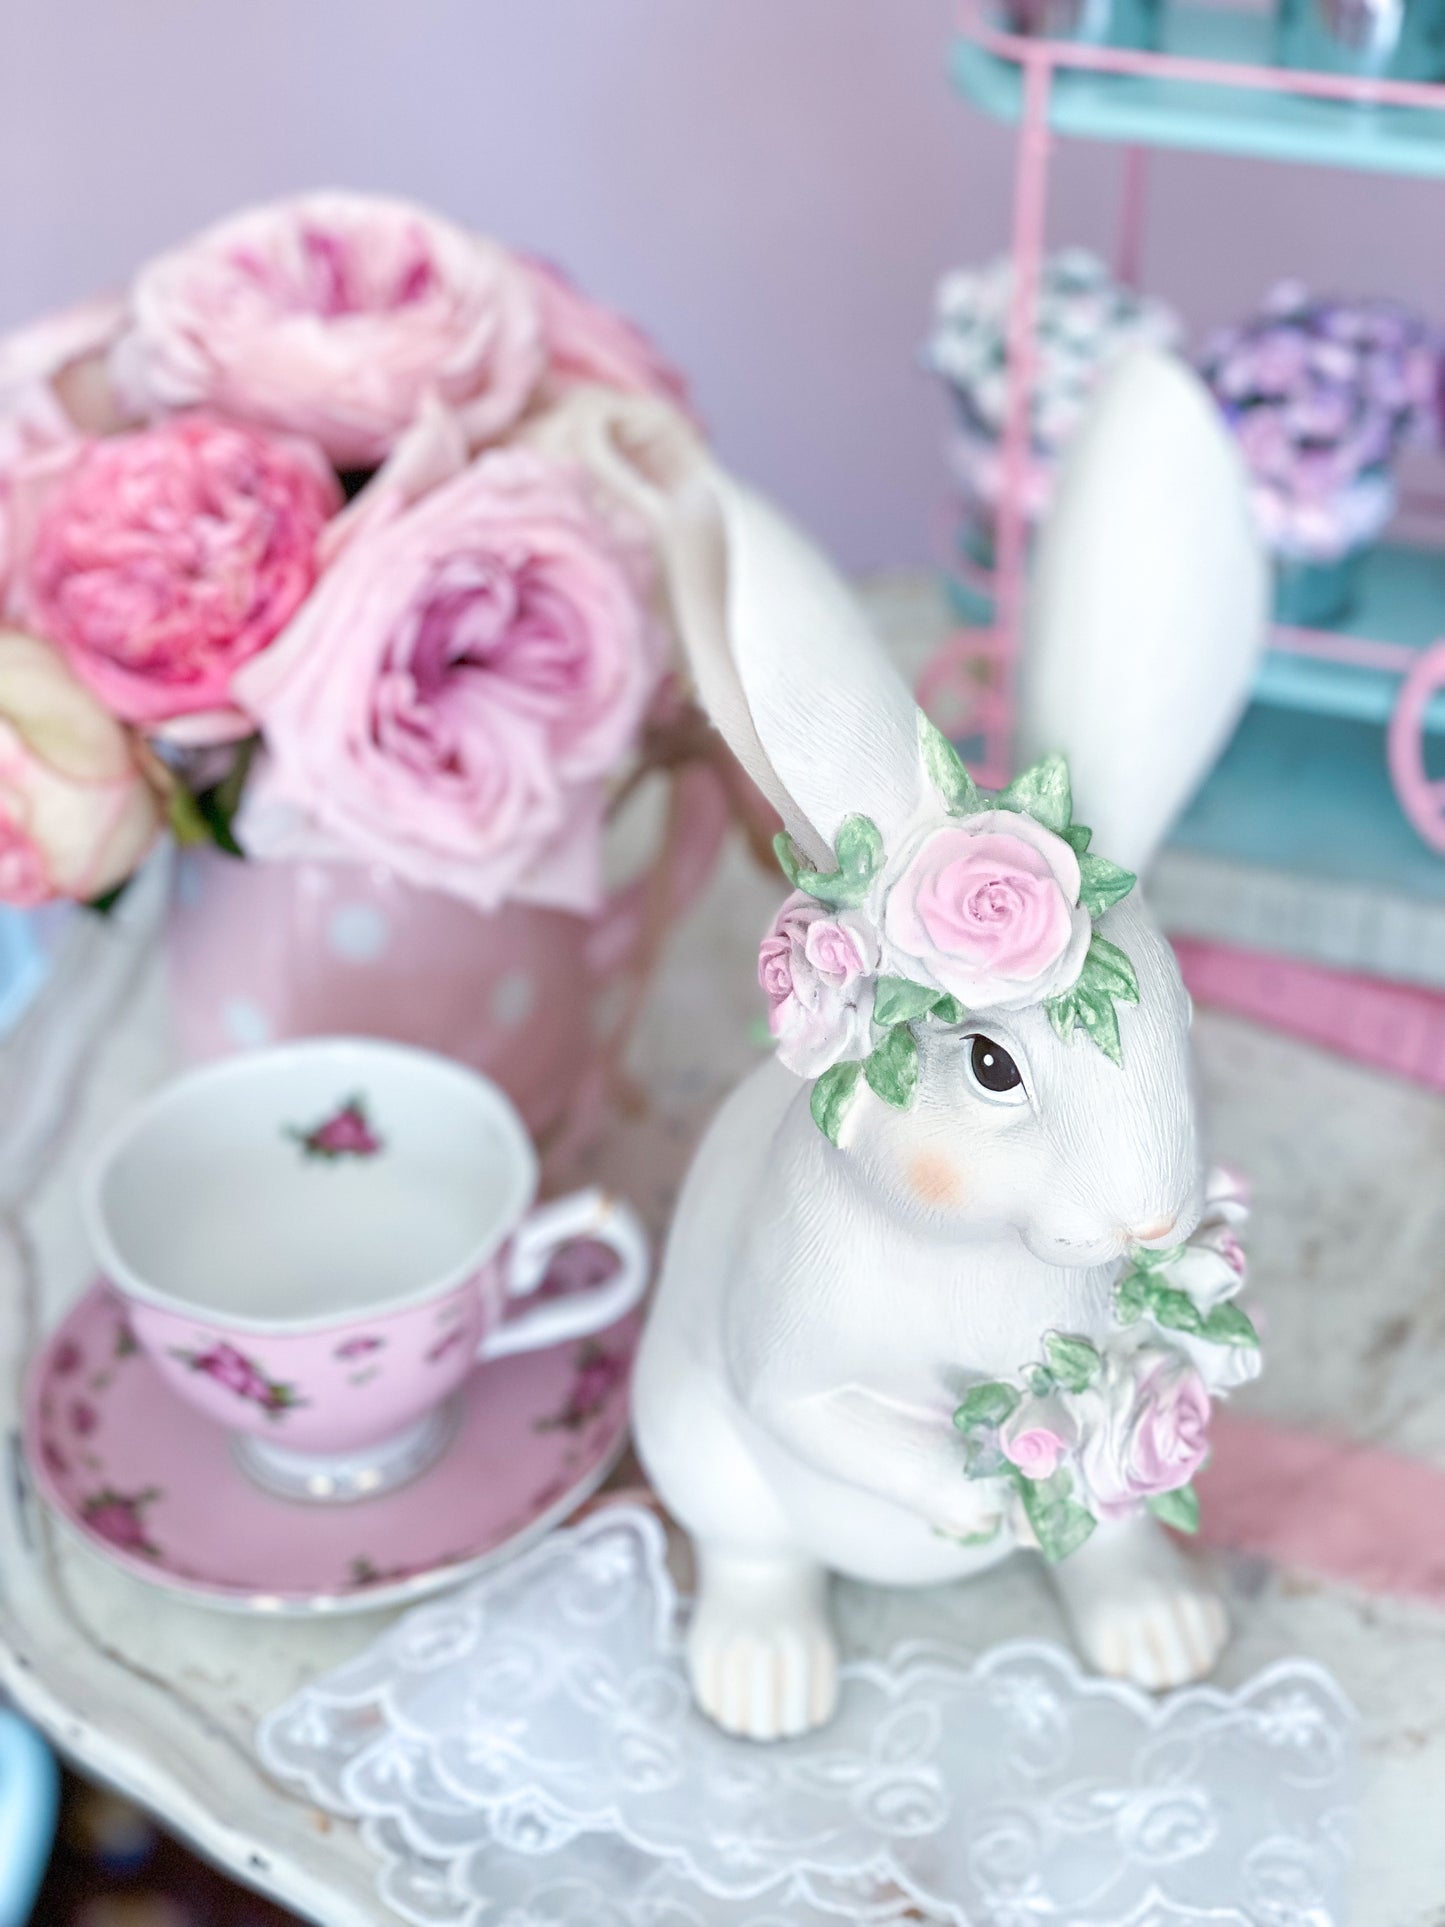 White Bunny with Pink Roses Figurine